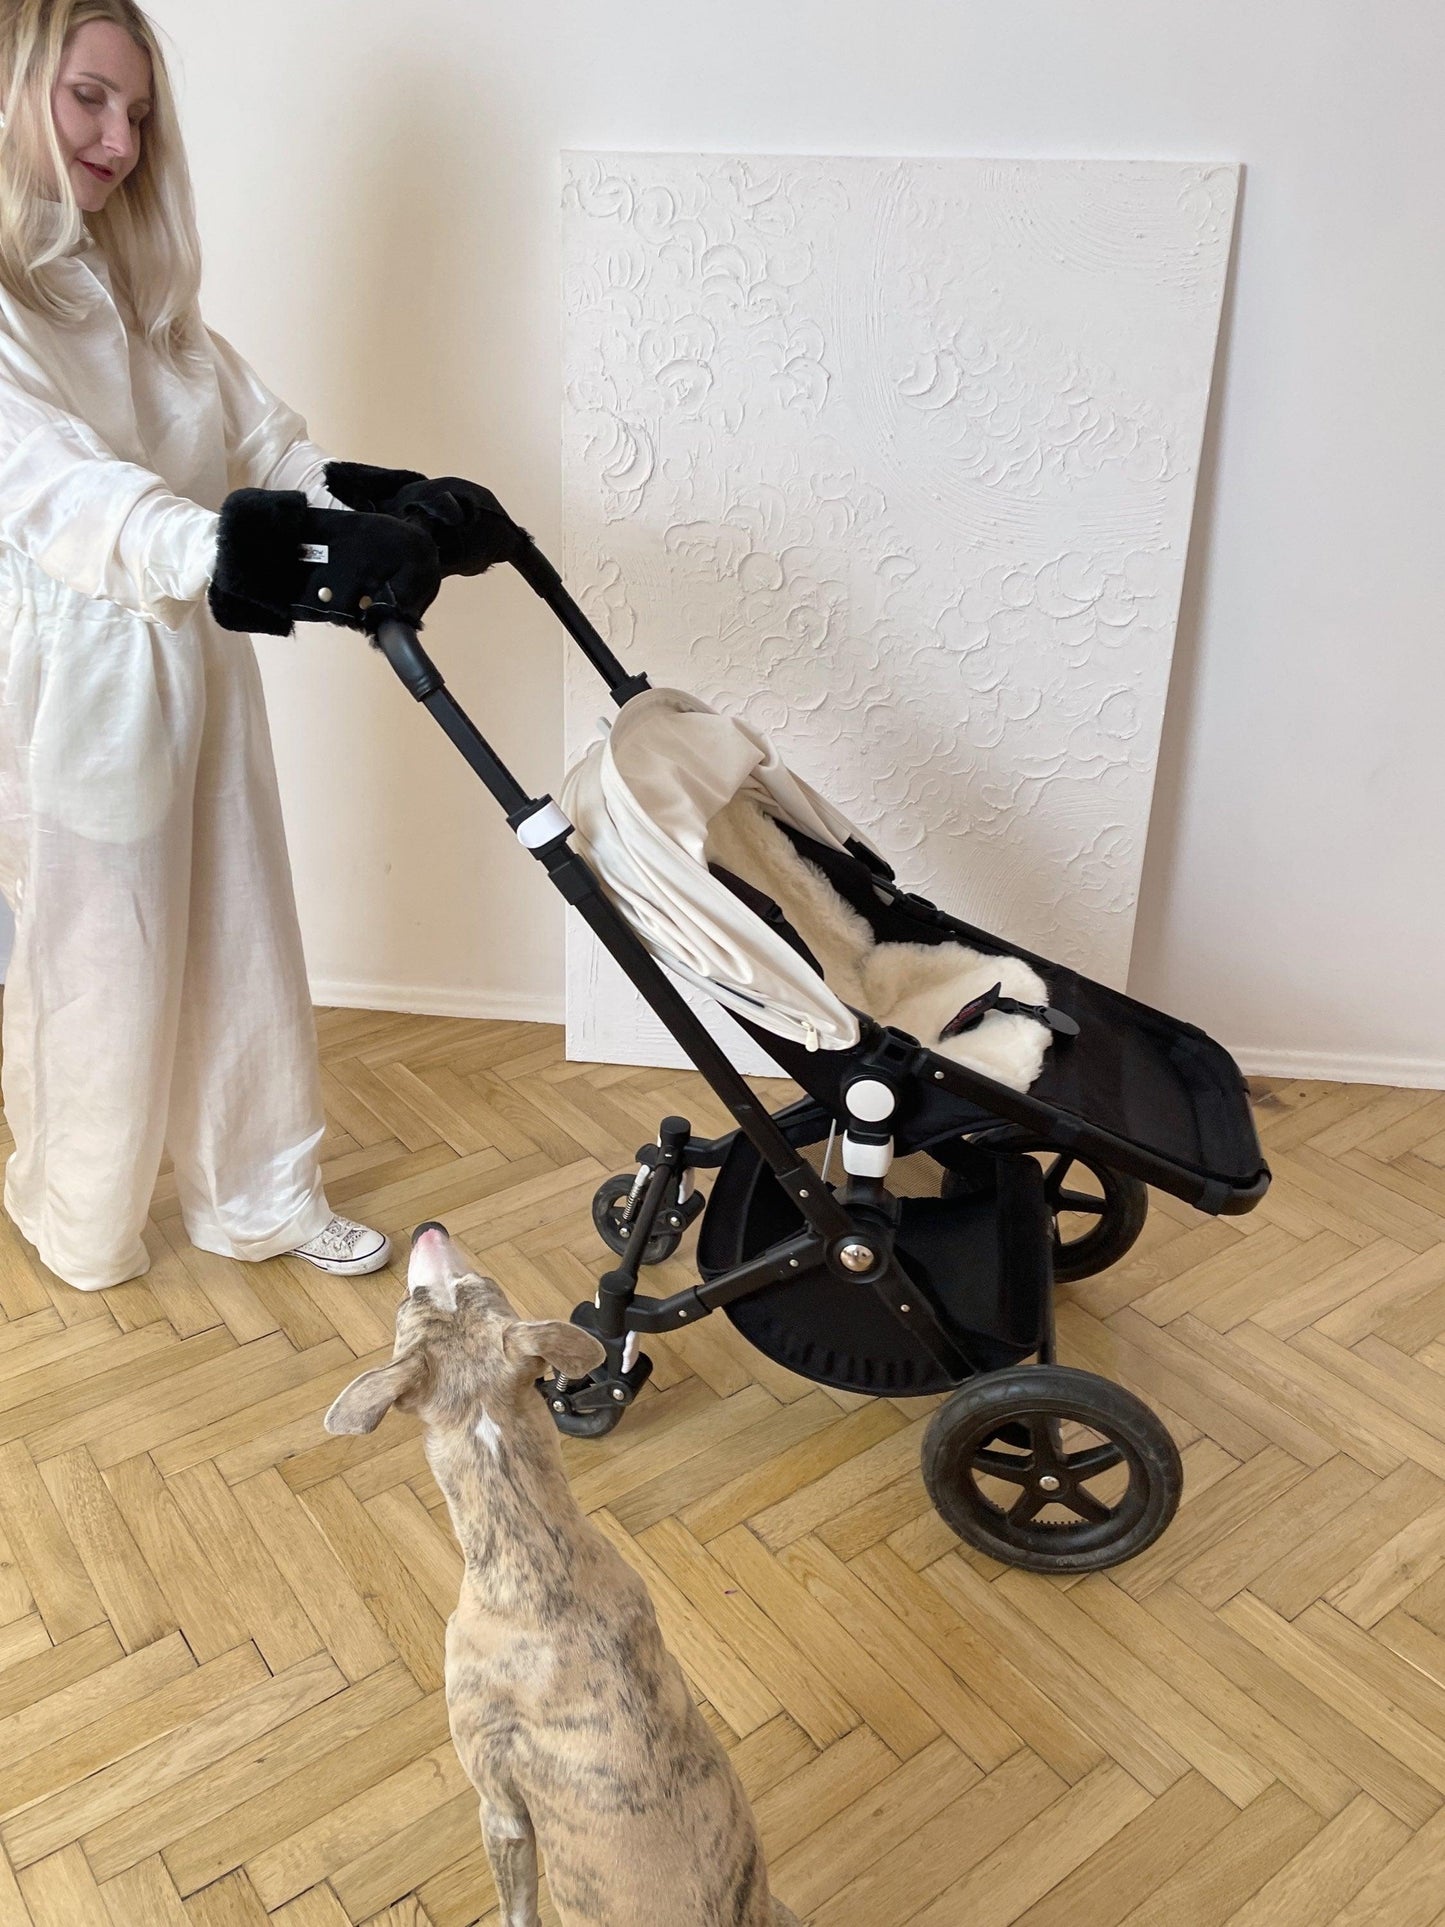 A woman standing next to a stroller with a dog covered in MellowConceptStore's Waterproof Natural Sheepskin Stroller Hand Muffs - Black&White.